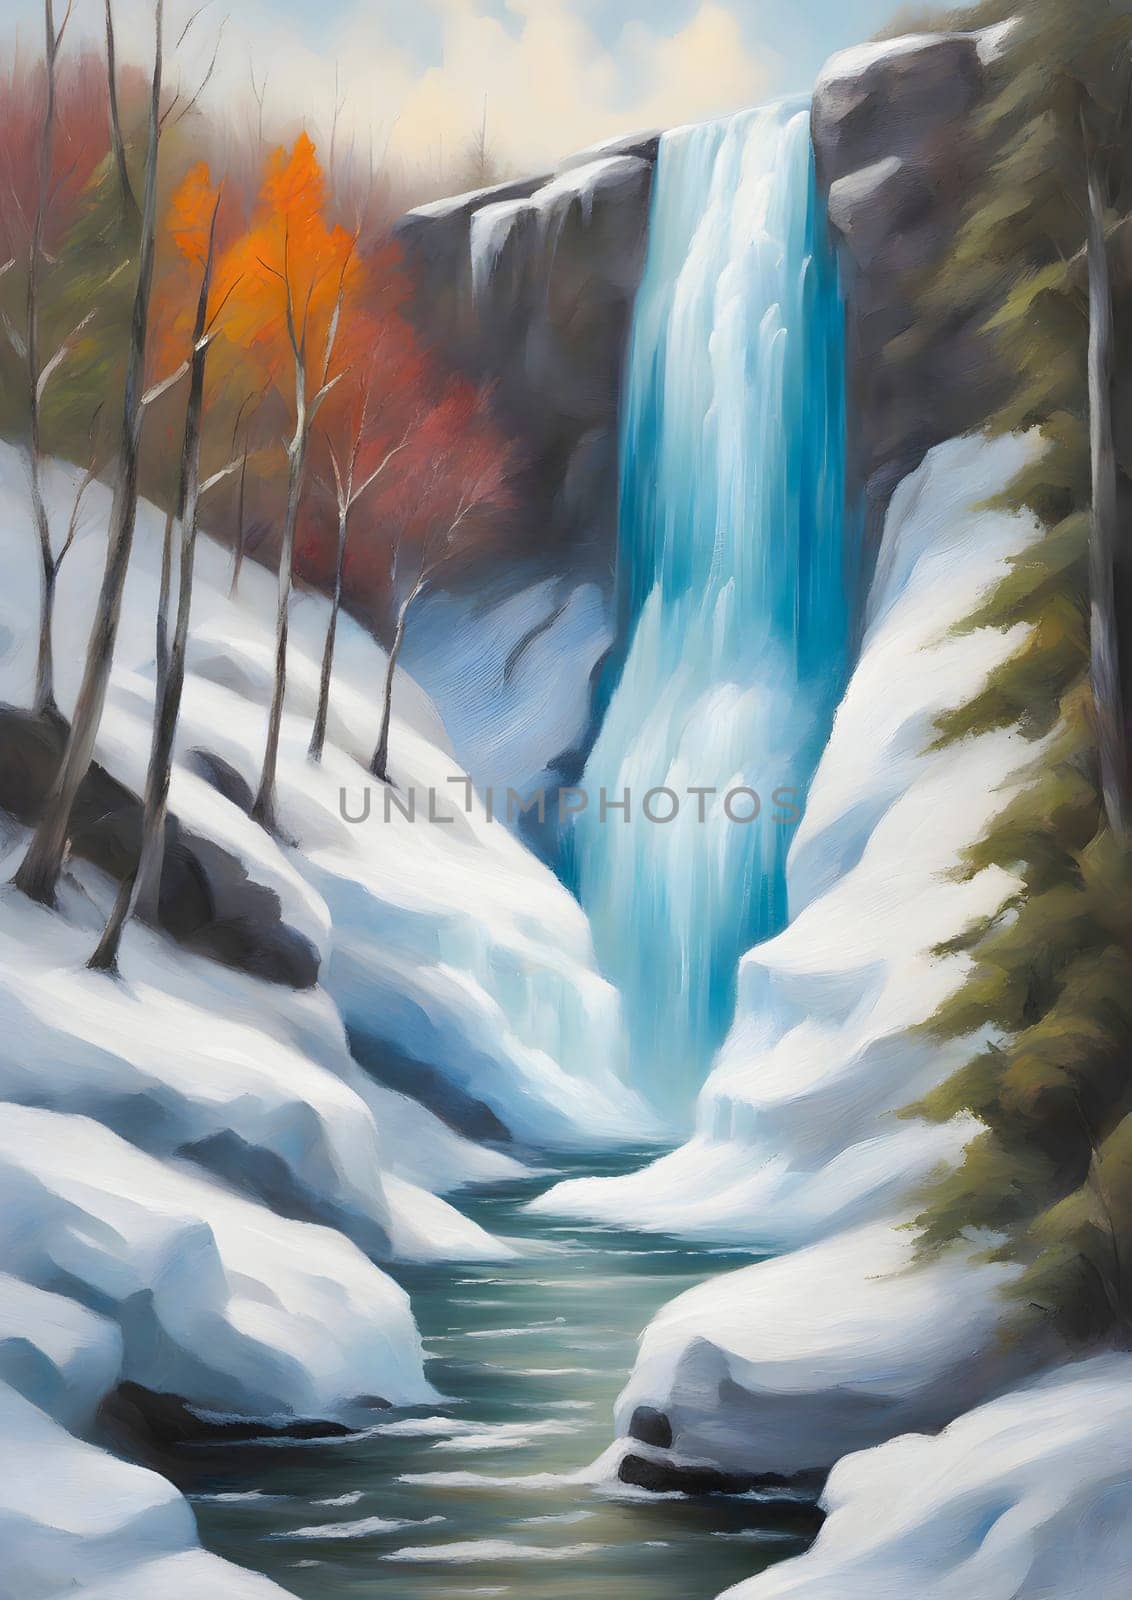 The picture shows a waterfall in winter. The waterfall is covered with ice and snow, creating a beautiful winter scenery. In the background there is a forest and a mountain. Generate AI